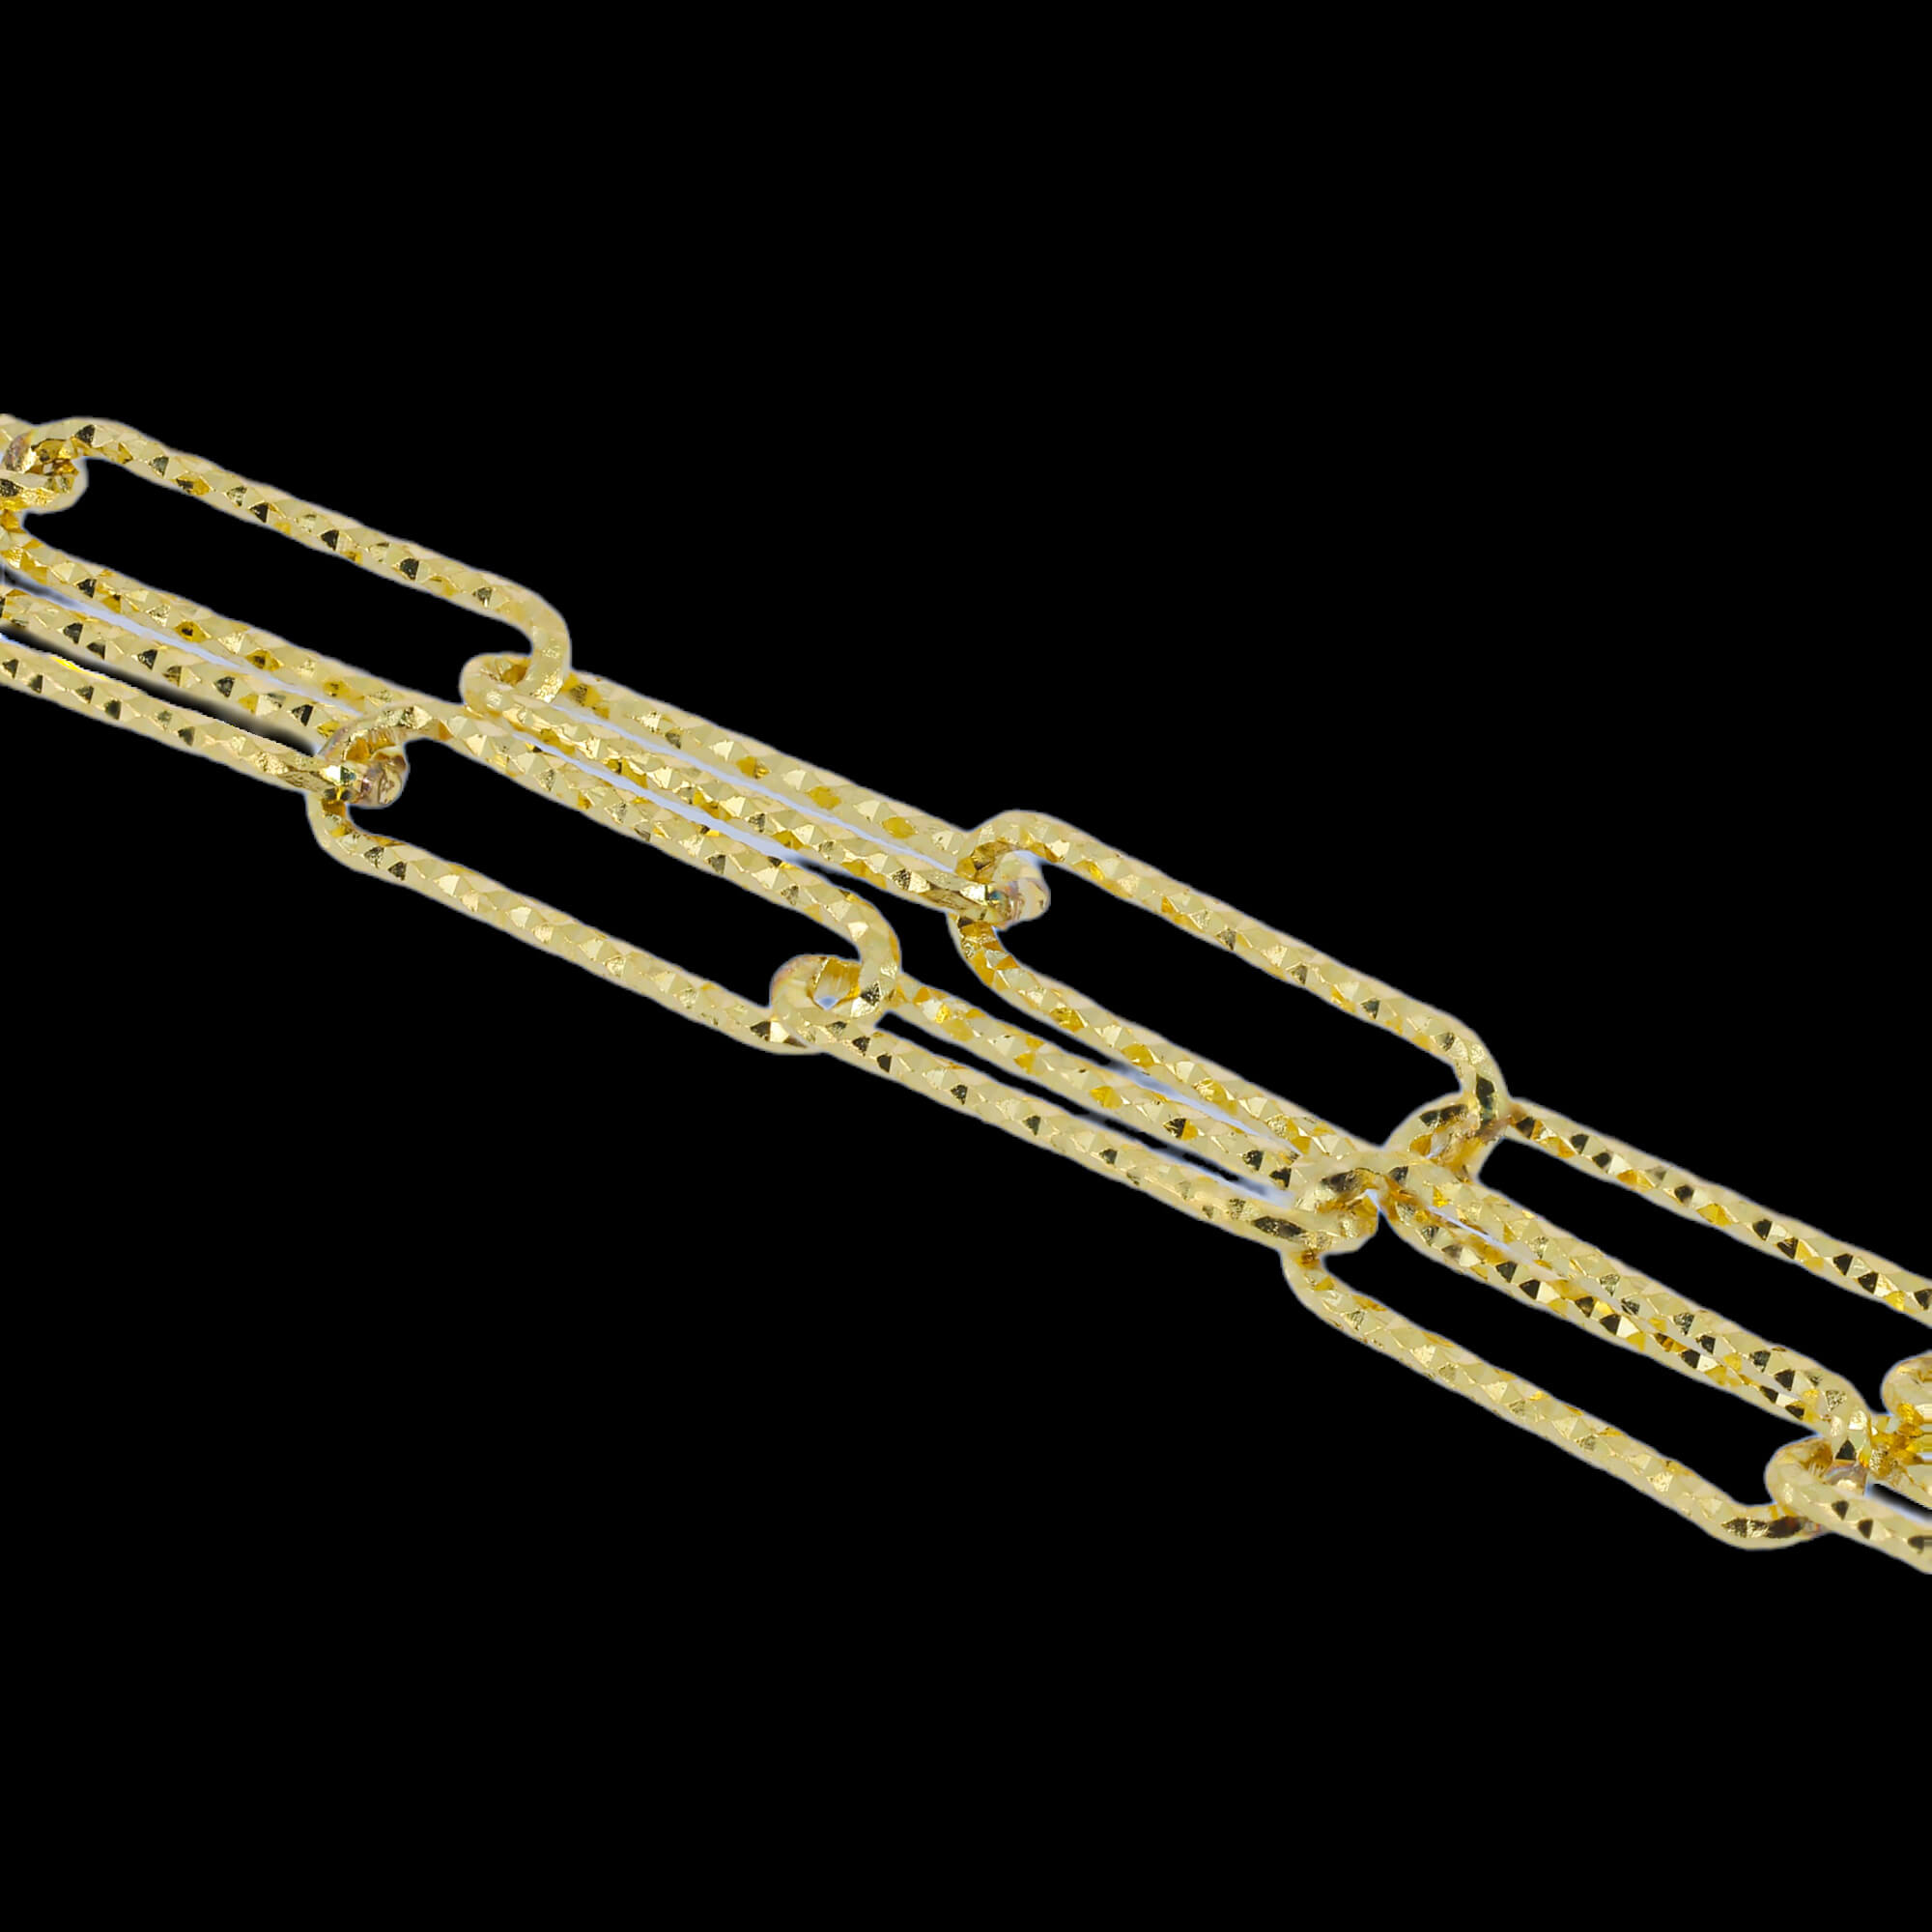 Golden tricolor chain of 18kt gold, 5 elements